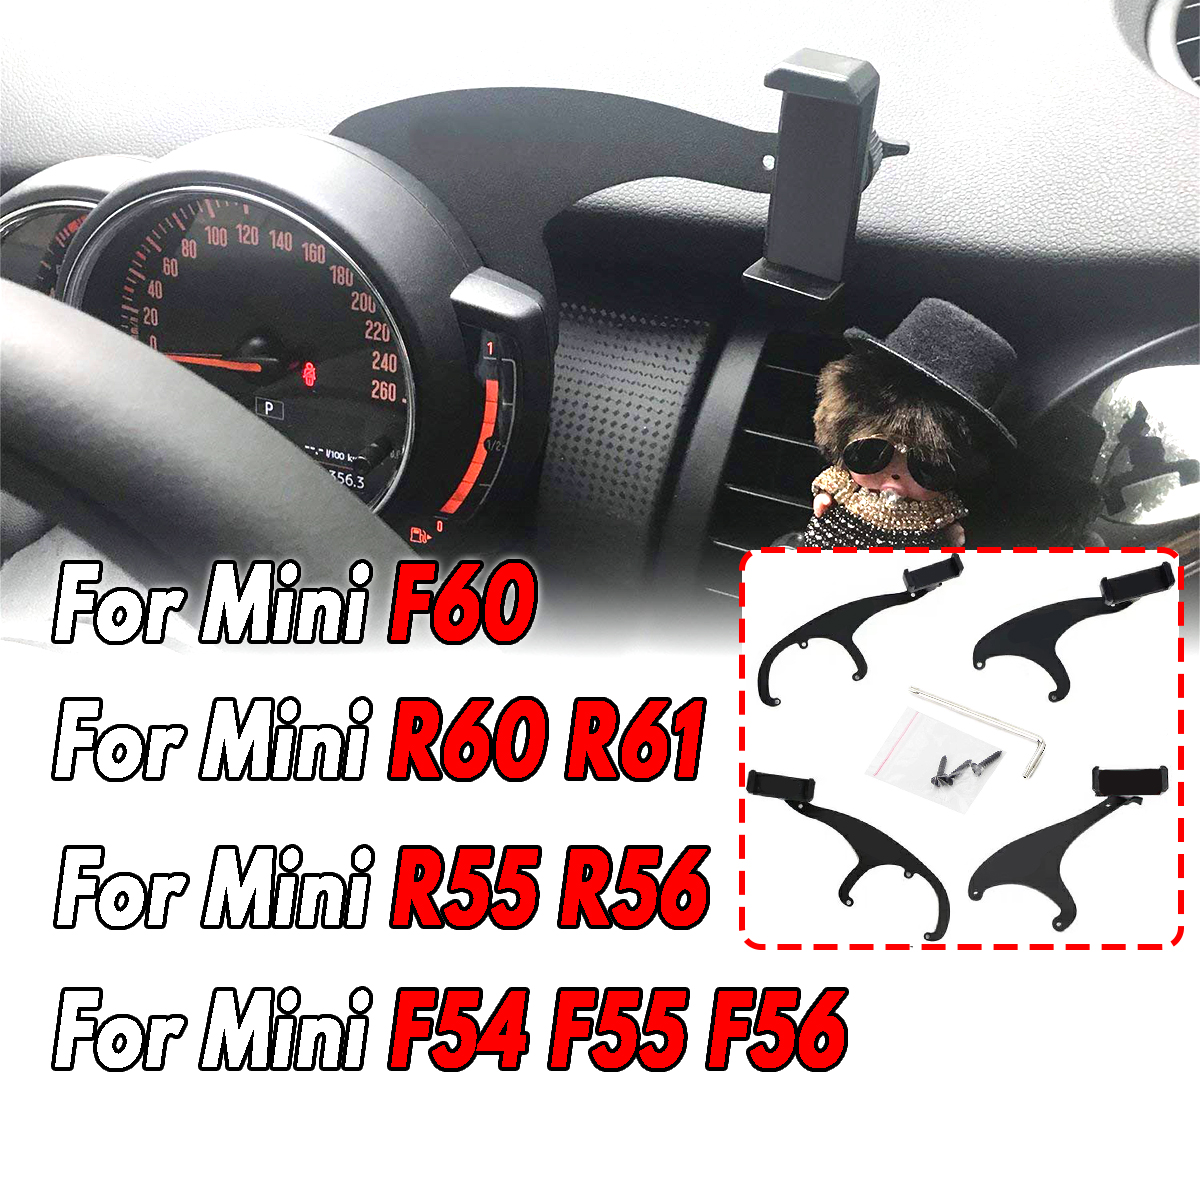 Bakeey-360deg-Rotation-Car-Phone-Mount-Cradle-Holder-Stand-for-Mini-Cooper-R60R61-R55R56-F60-1637156-2